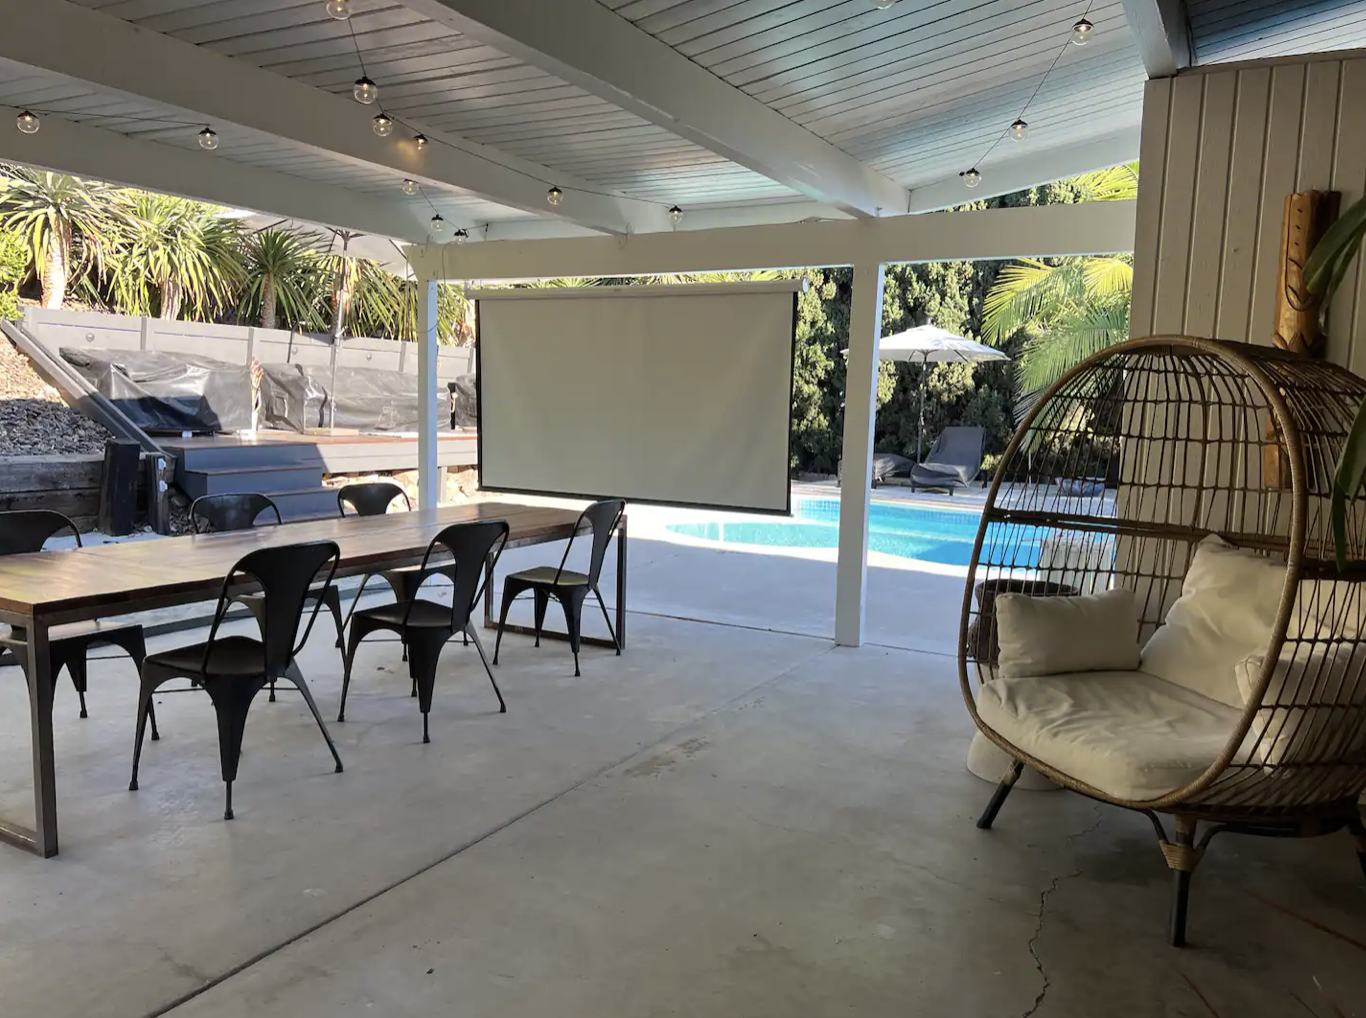 Patio Cinema Screen with Projector for movies under the stars